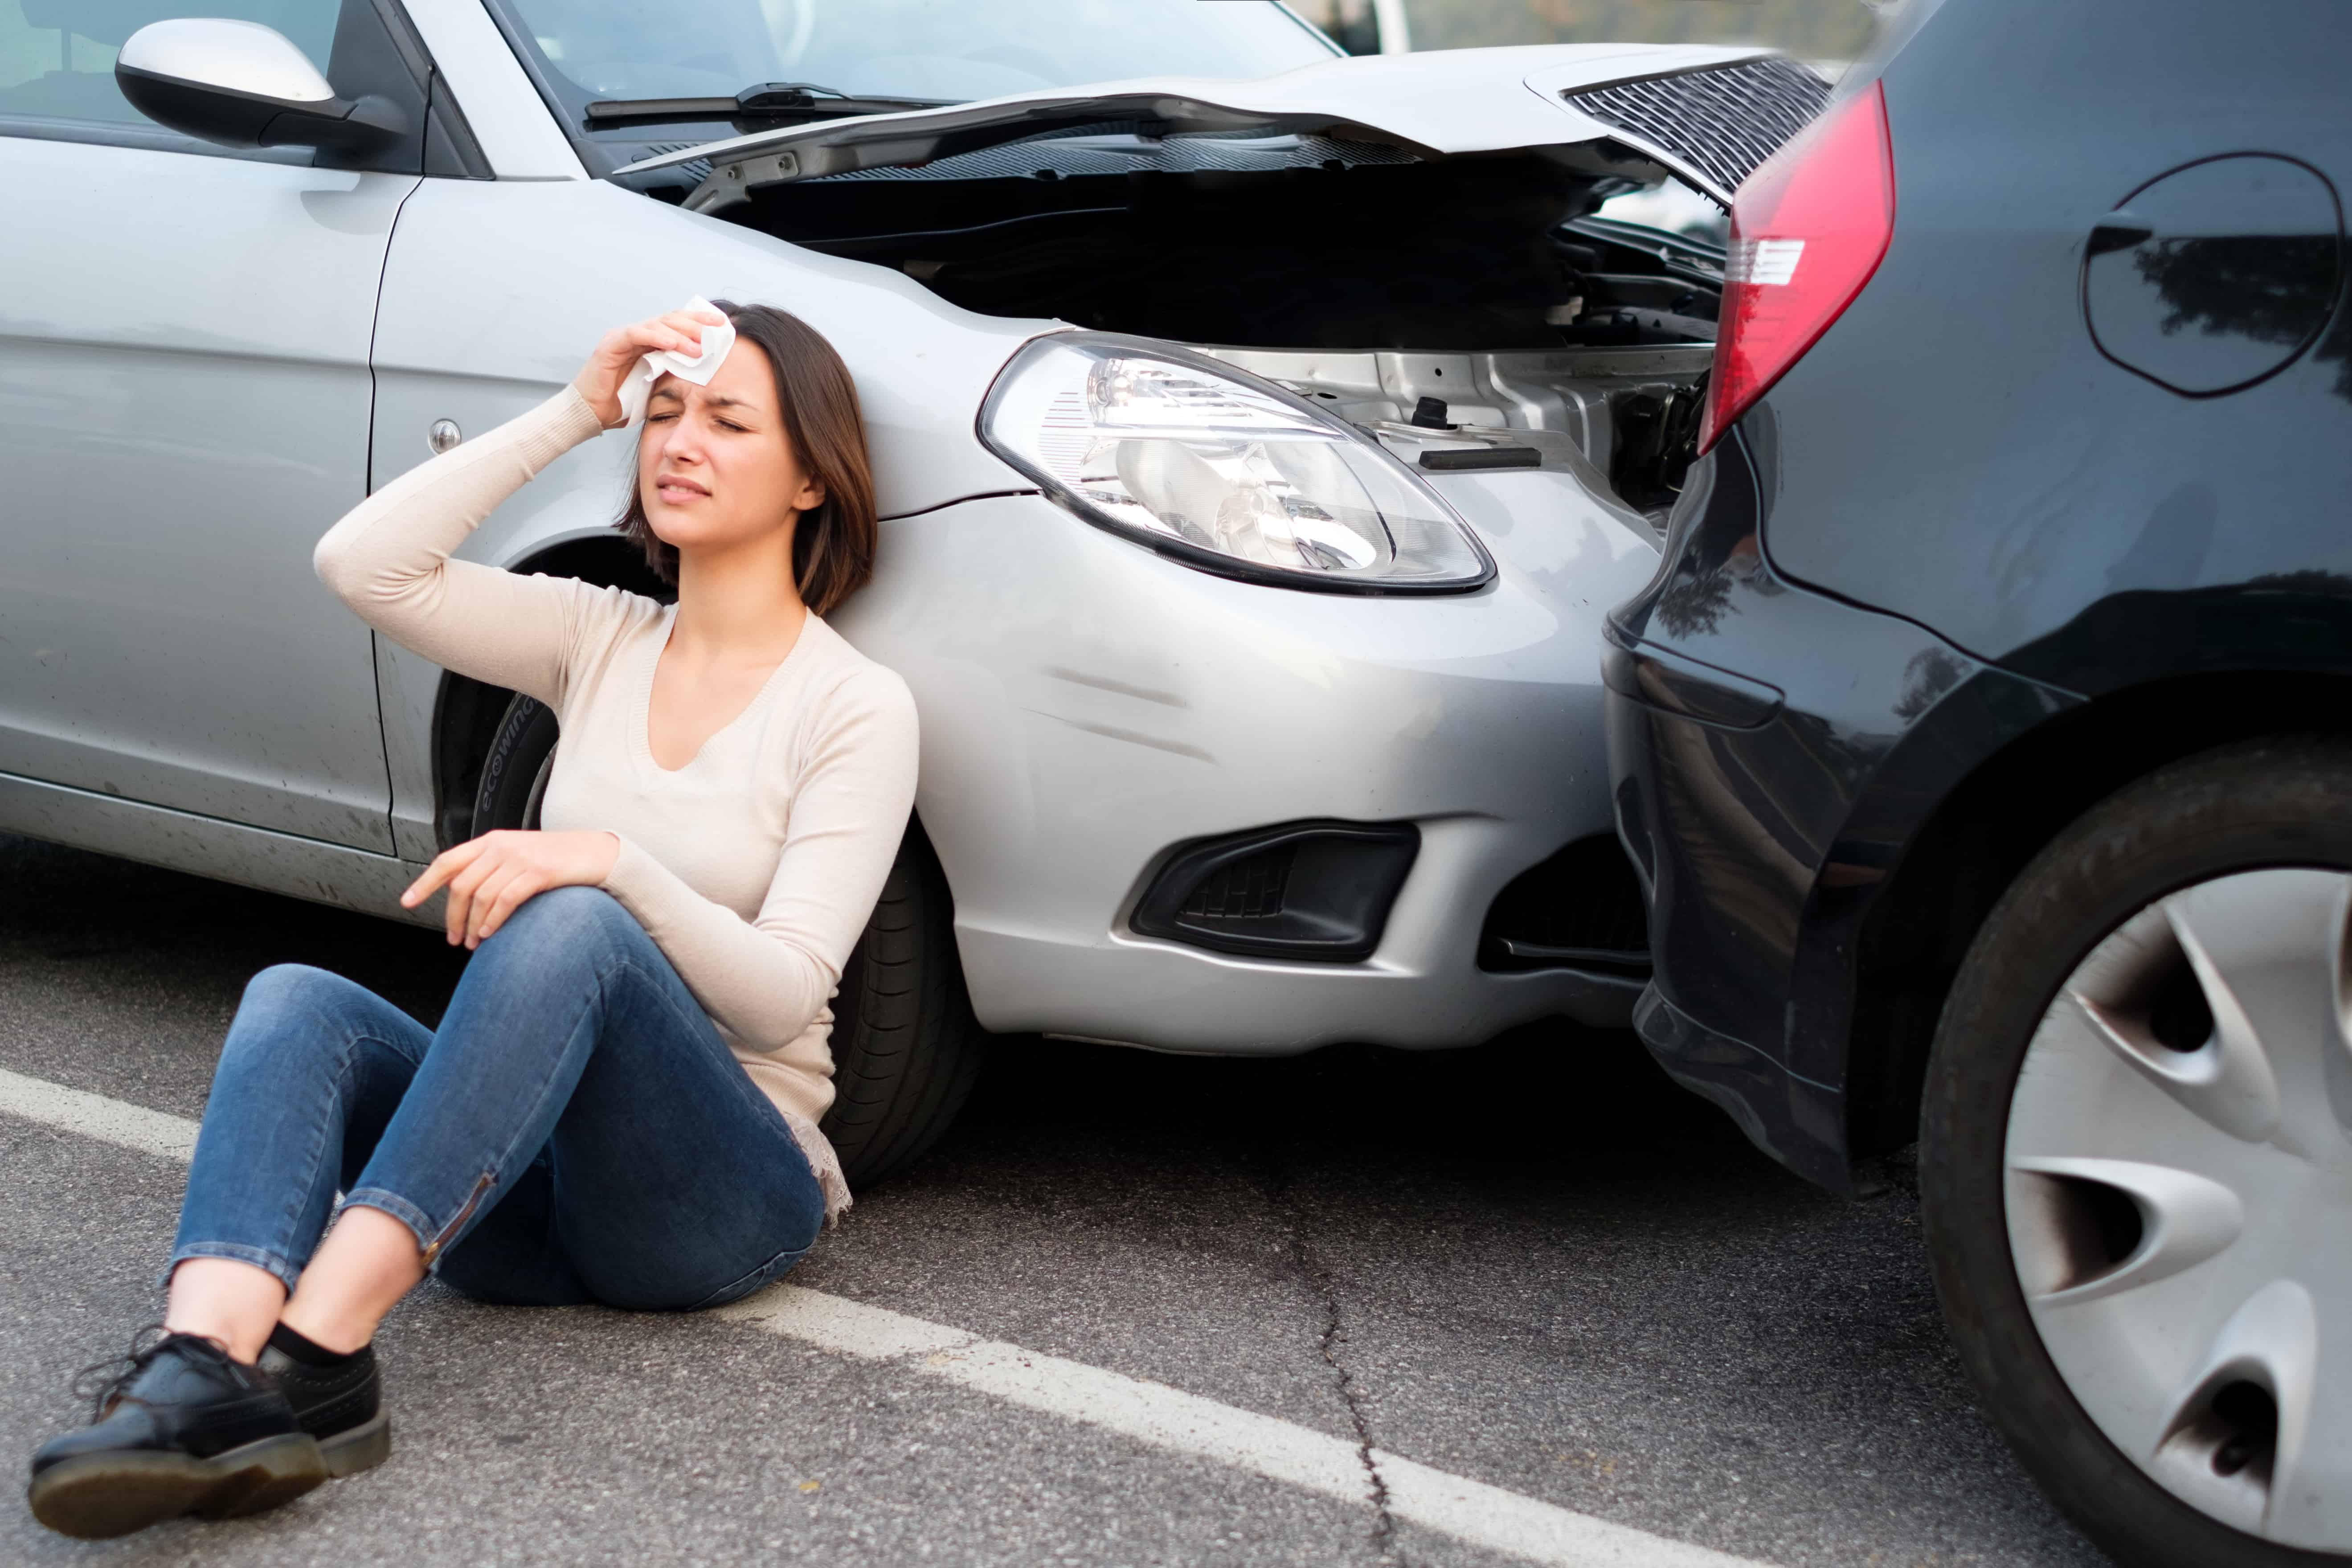 How Much Should I Ask For Pain and Suffering After a Car Accident?